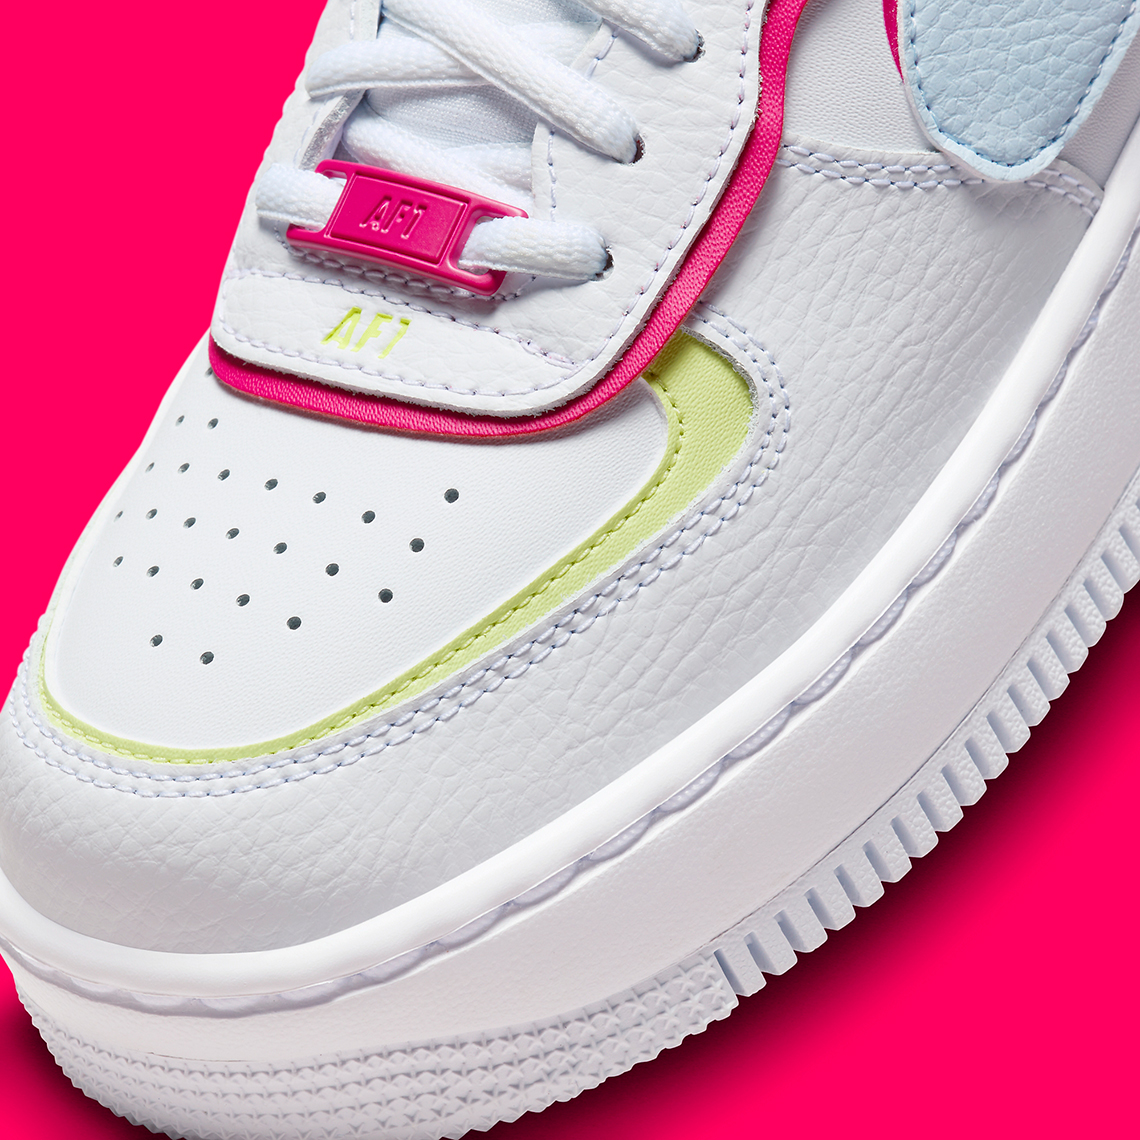 Nike Air Force 1 Low Shadow White Pink Yellow Fq8885 100 1